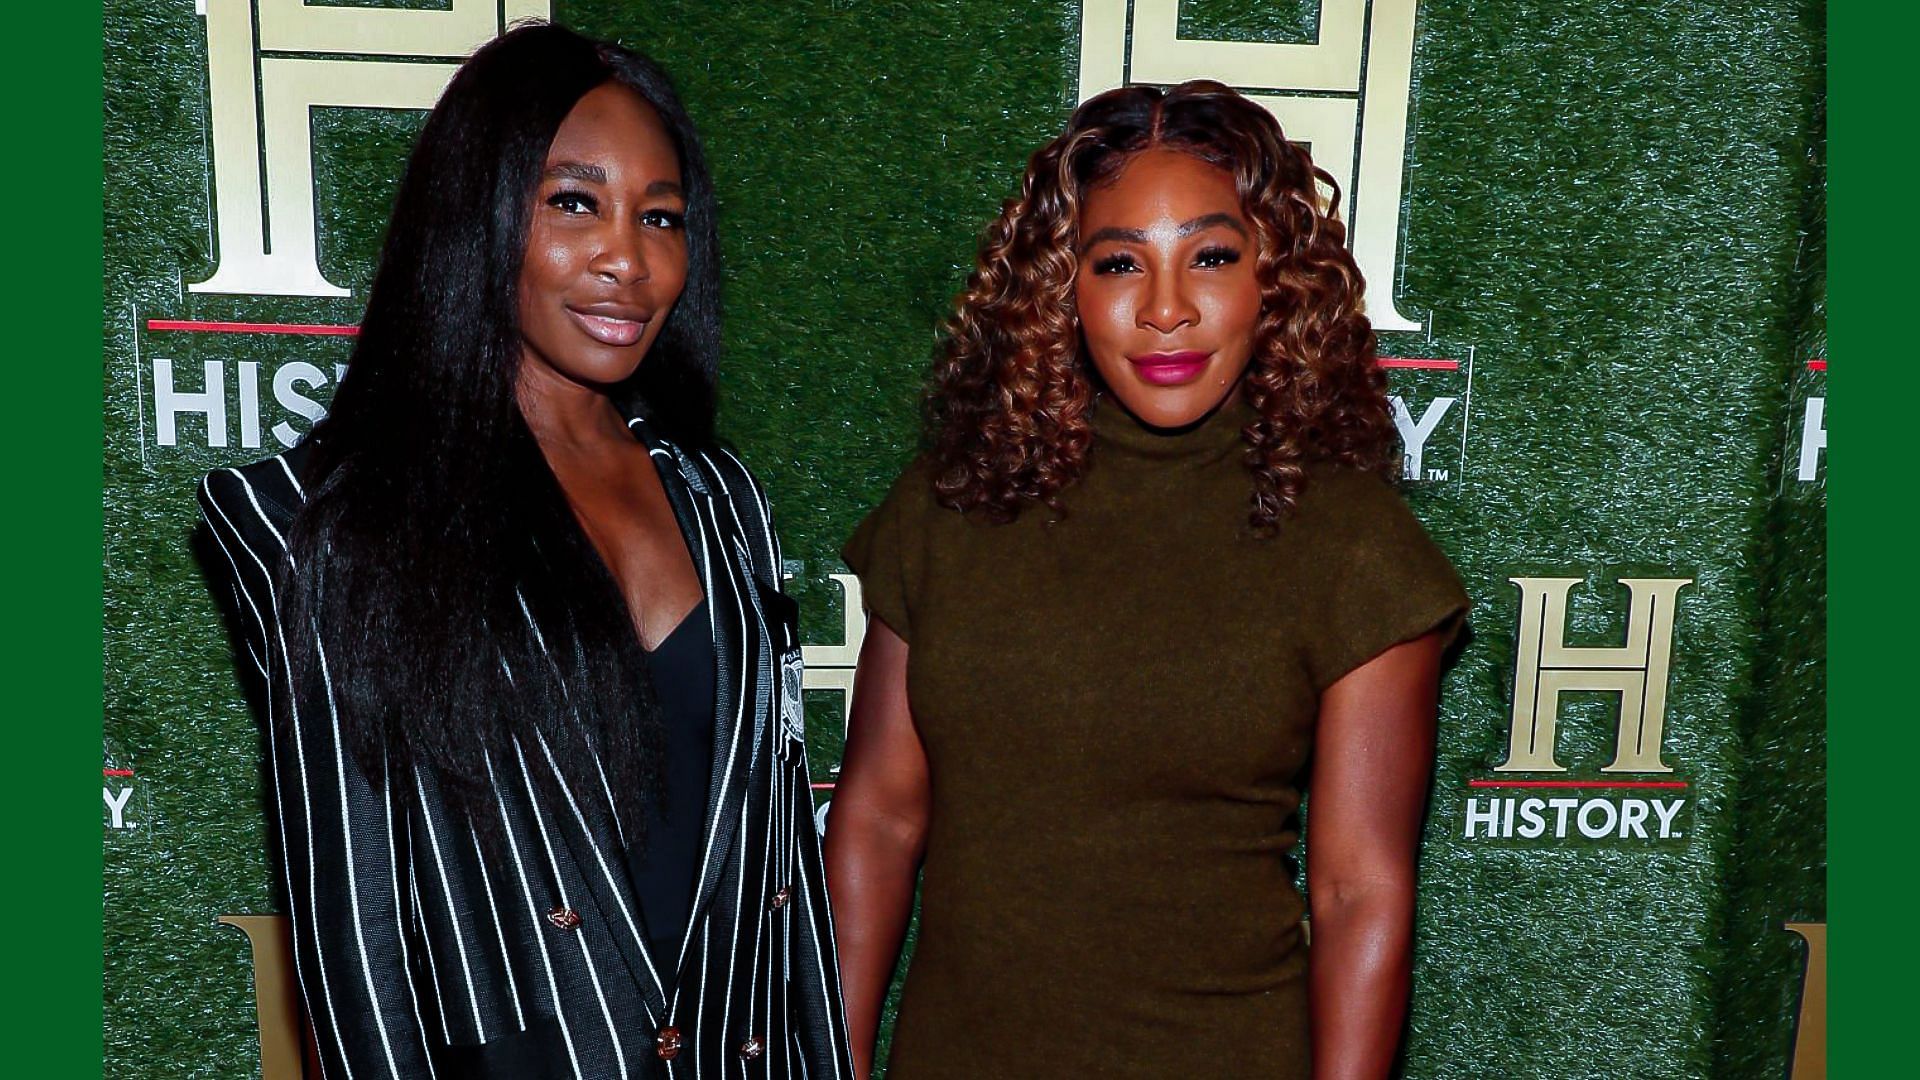 Have a look at a rare picture of Serena Williams &amp; Venus Williams. 